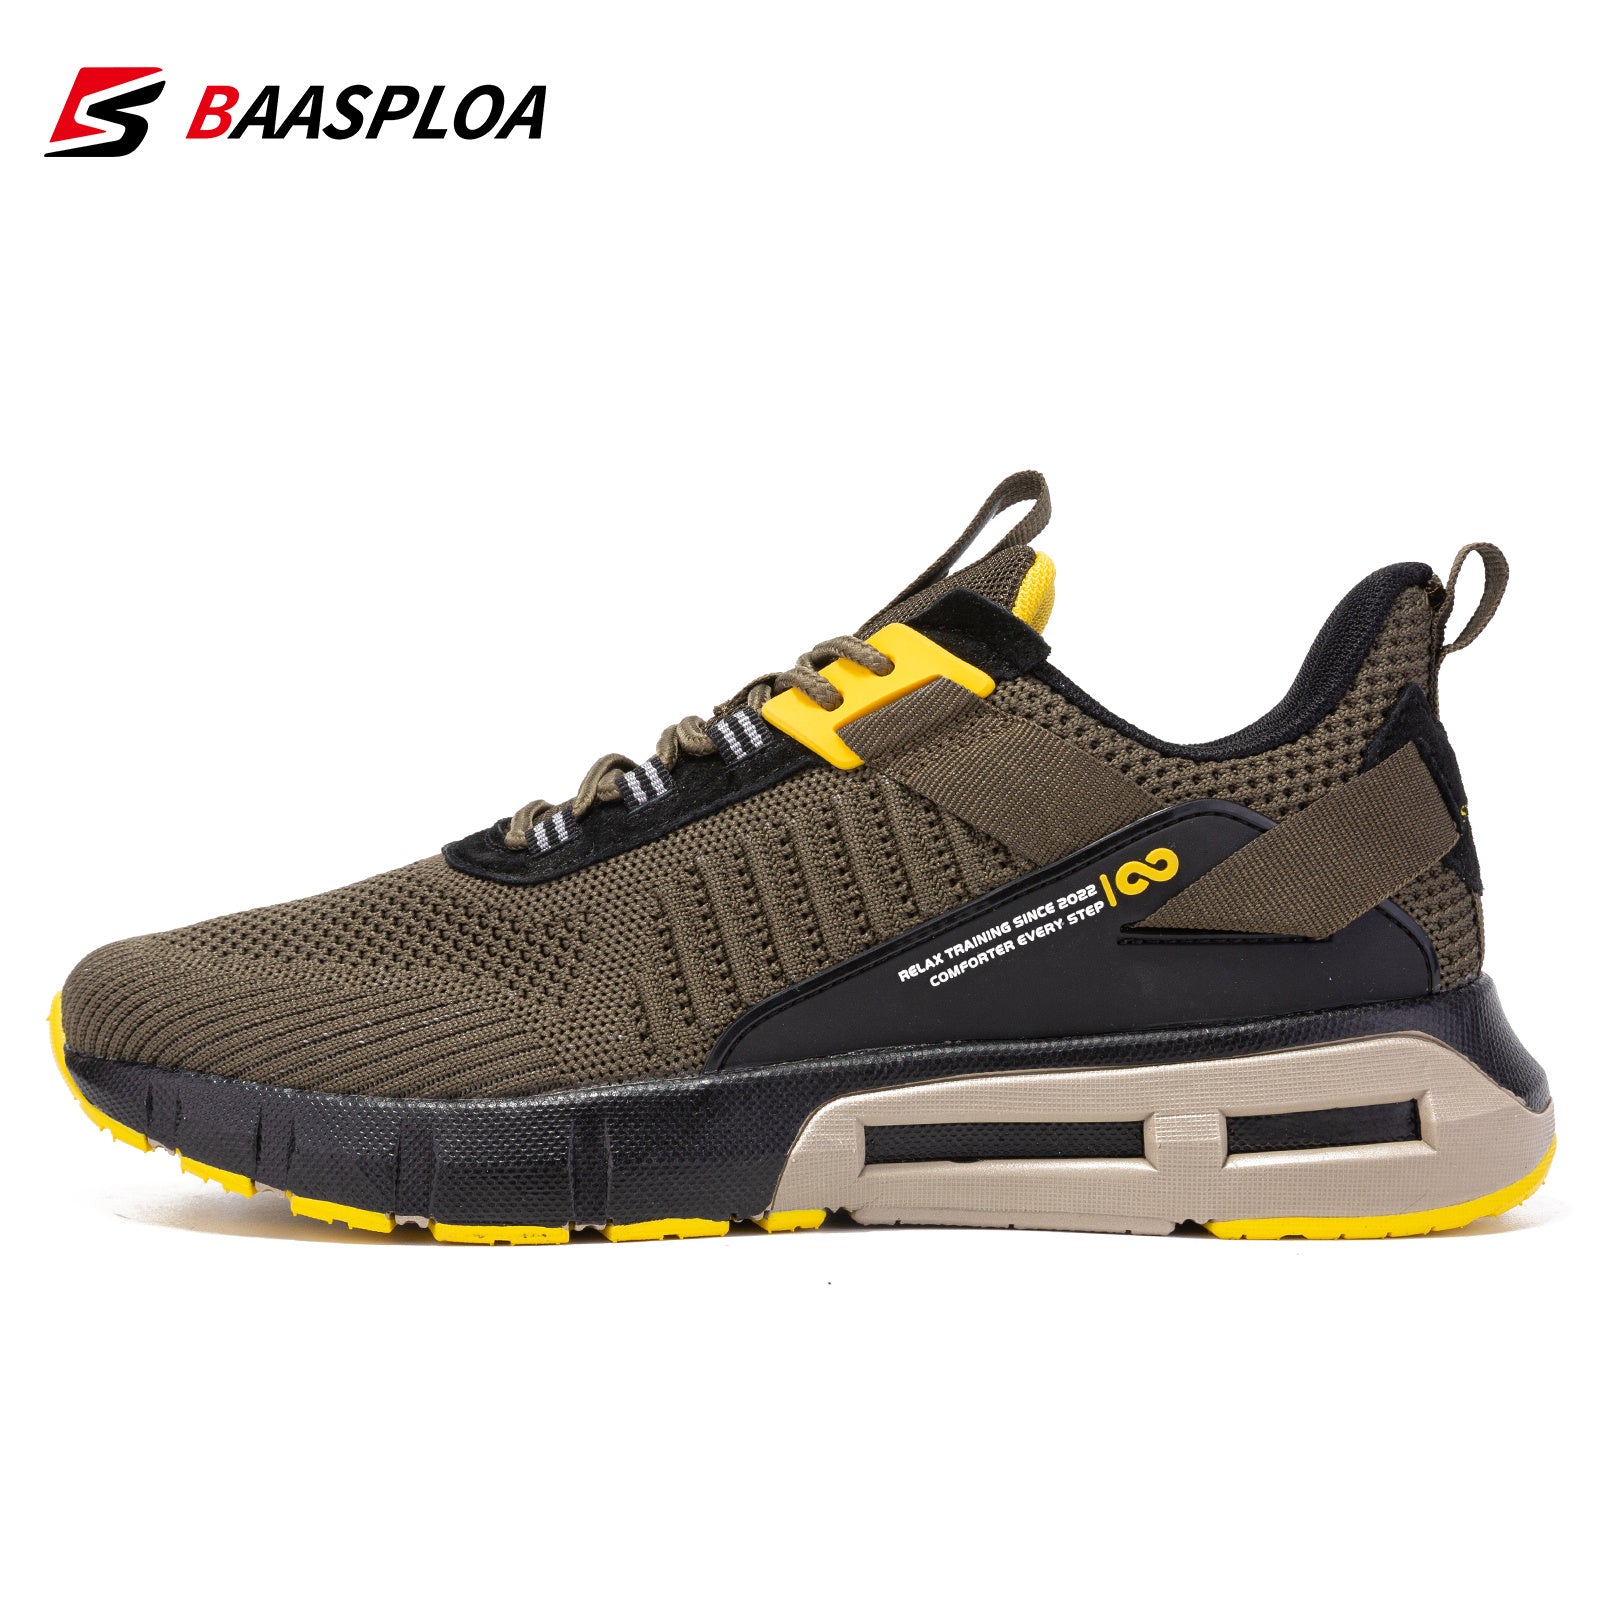 New Men's Casual Sneakers Lightweight Breathable Walking Shoes Comfortable Casual Male Non-Slip Running Gym Shoe